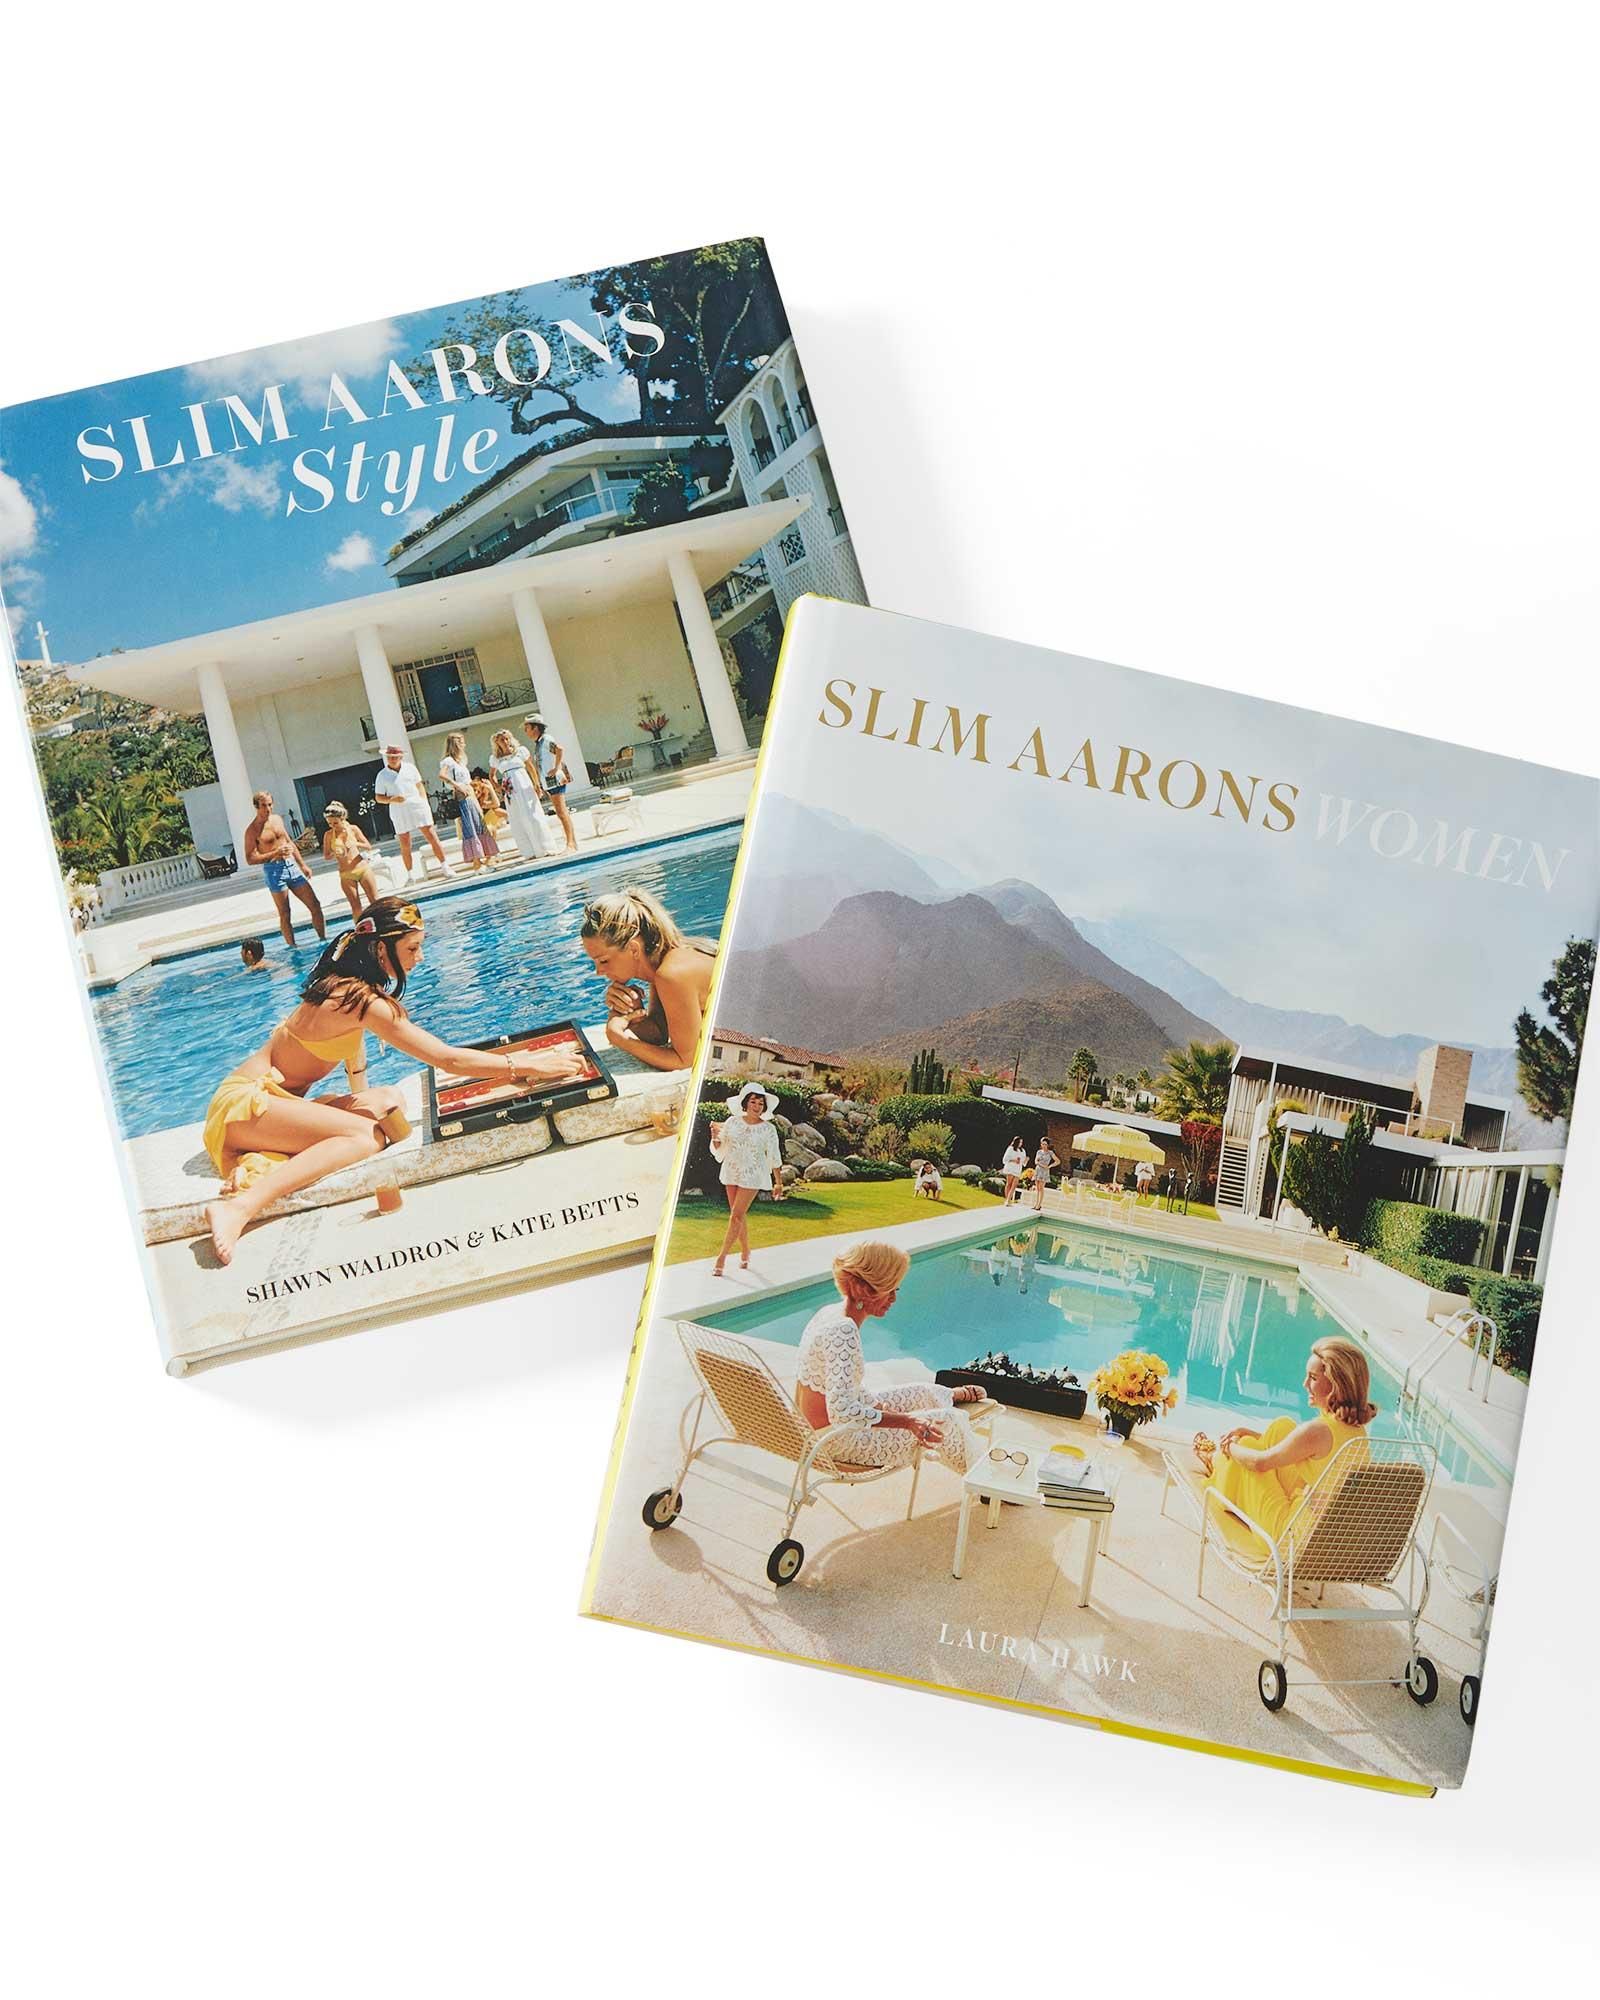 "Slim Aarons: Women" & "Slim Aarons: Style" by Slim Aarons, Shawn Waldron, Kate Betts, and Laura ... | Serena and Lily